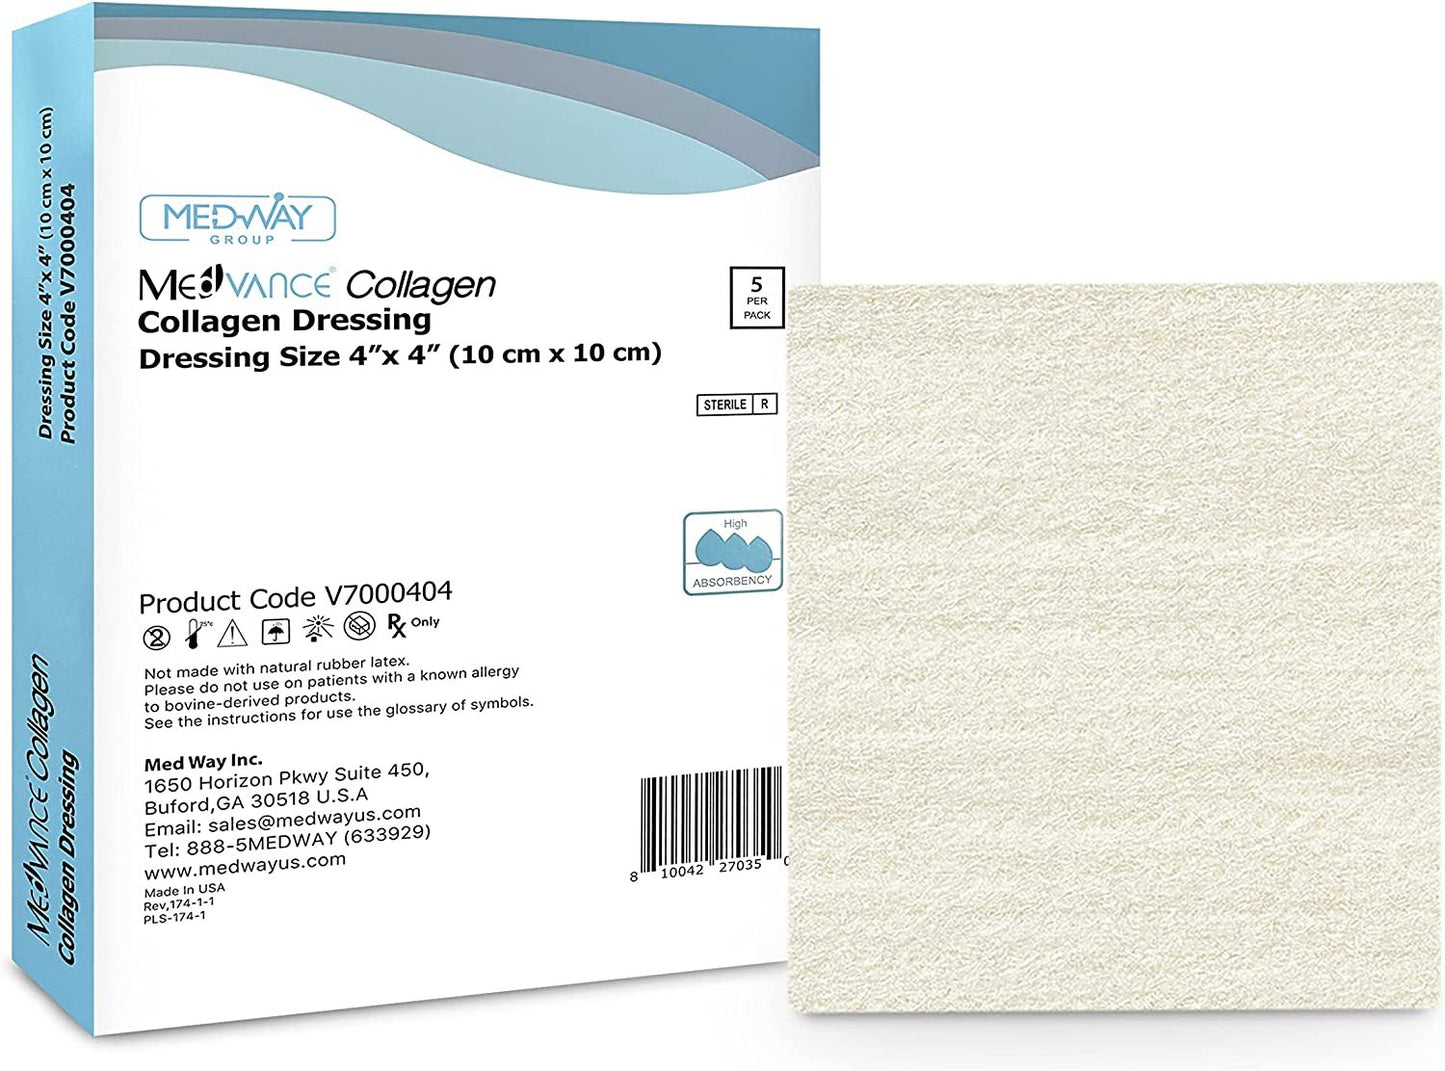 MedVance Collagen Non-Adhesive Wound Dressing, 4"x4", Single Piece